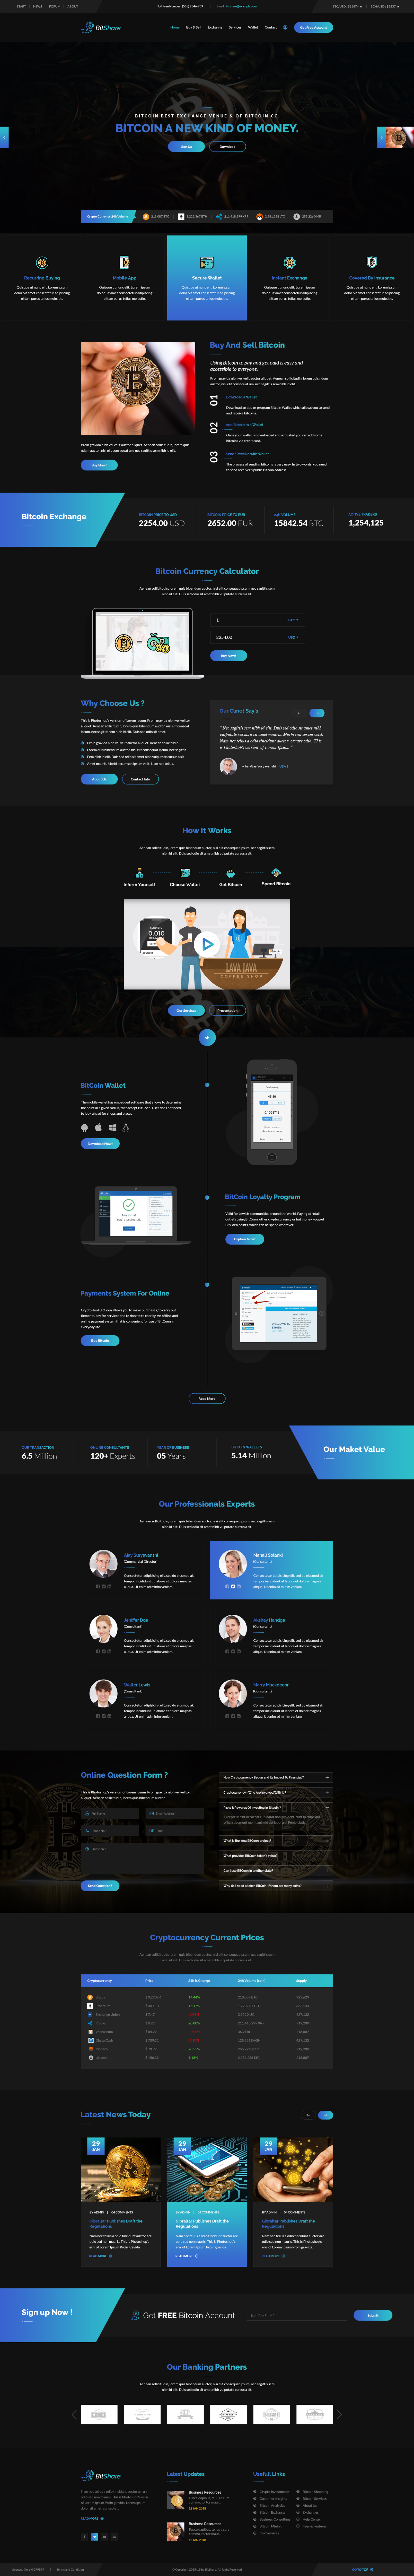 Bit Share - Bitcoin Crypto Currency PSD Template - 2